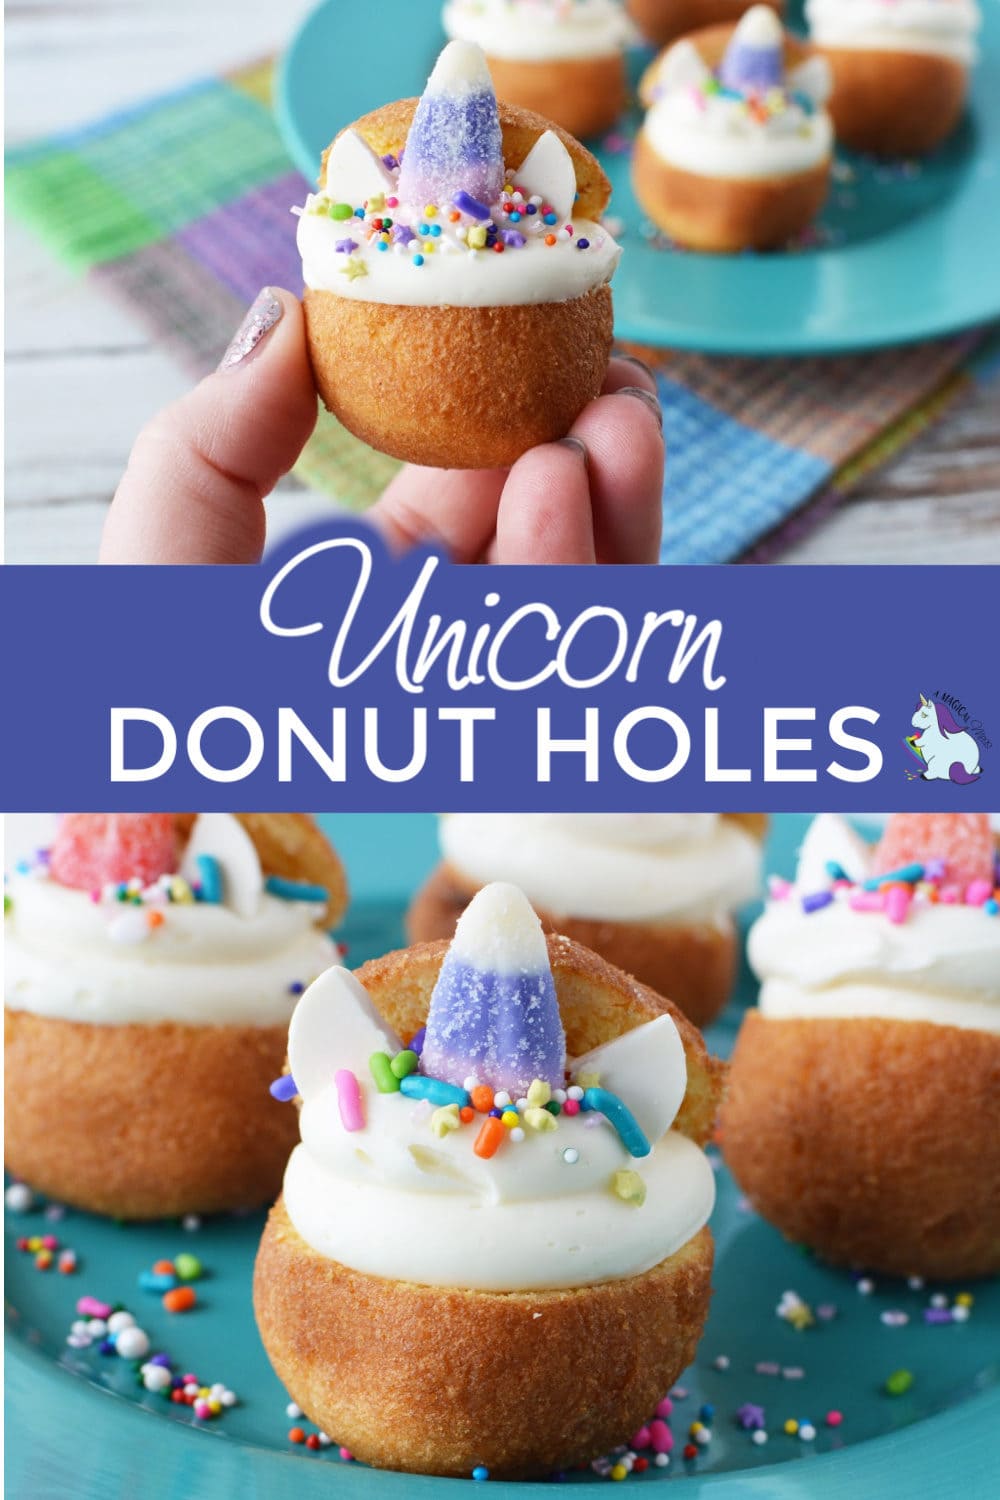 Holding a munchkin donut decorated as a unicorn, and several unicorn donut holes on a plate. 